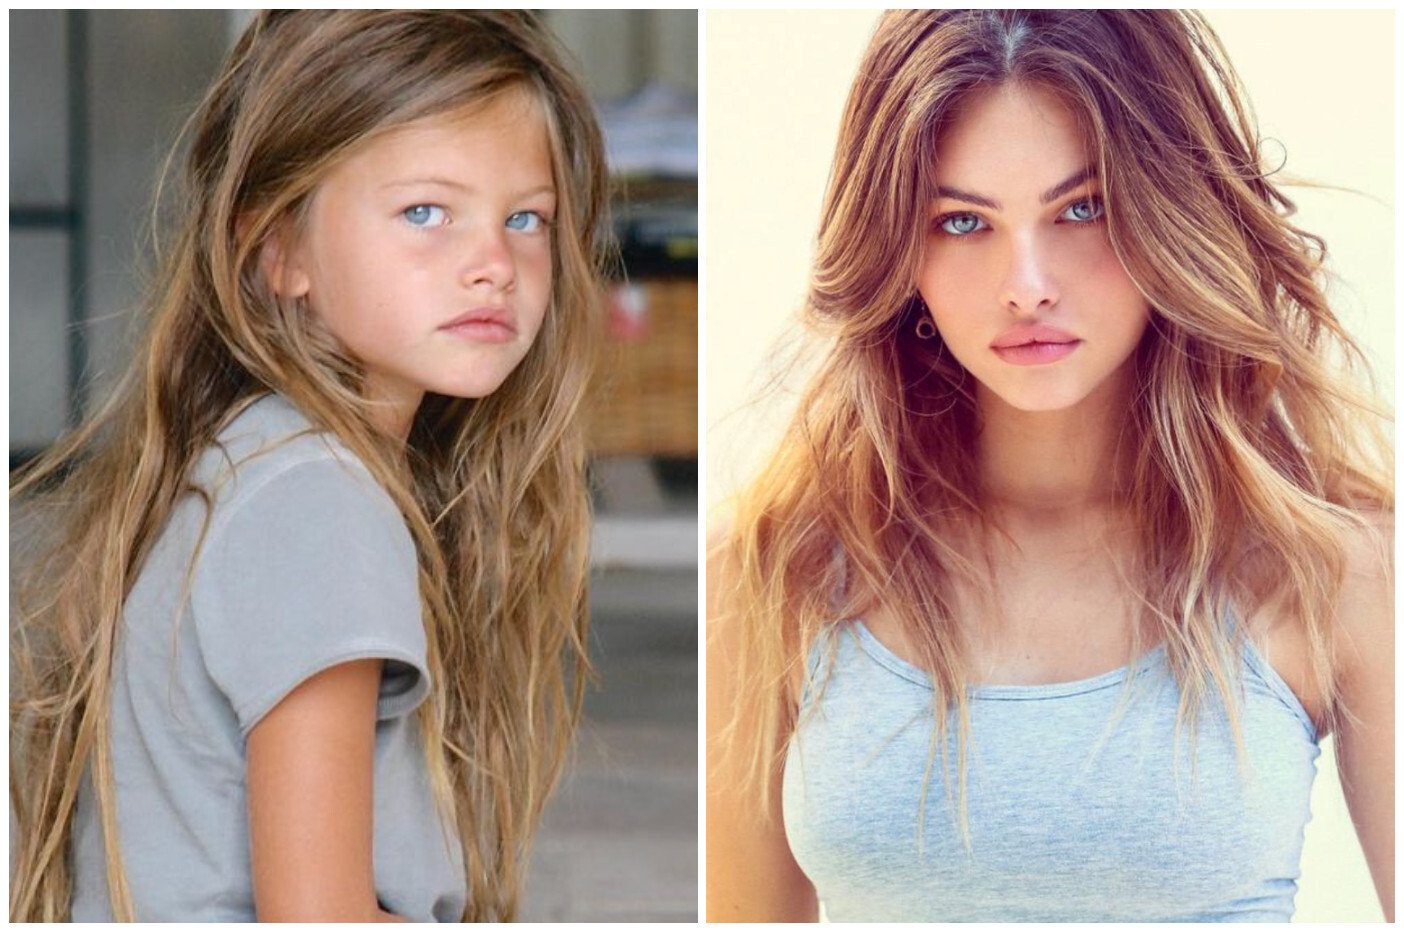 Meet French model Thylane Blondeau, 'the most beautiful girl in